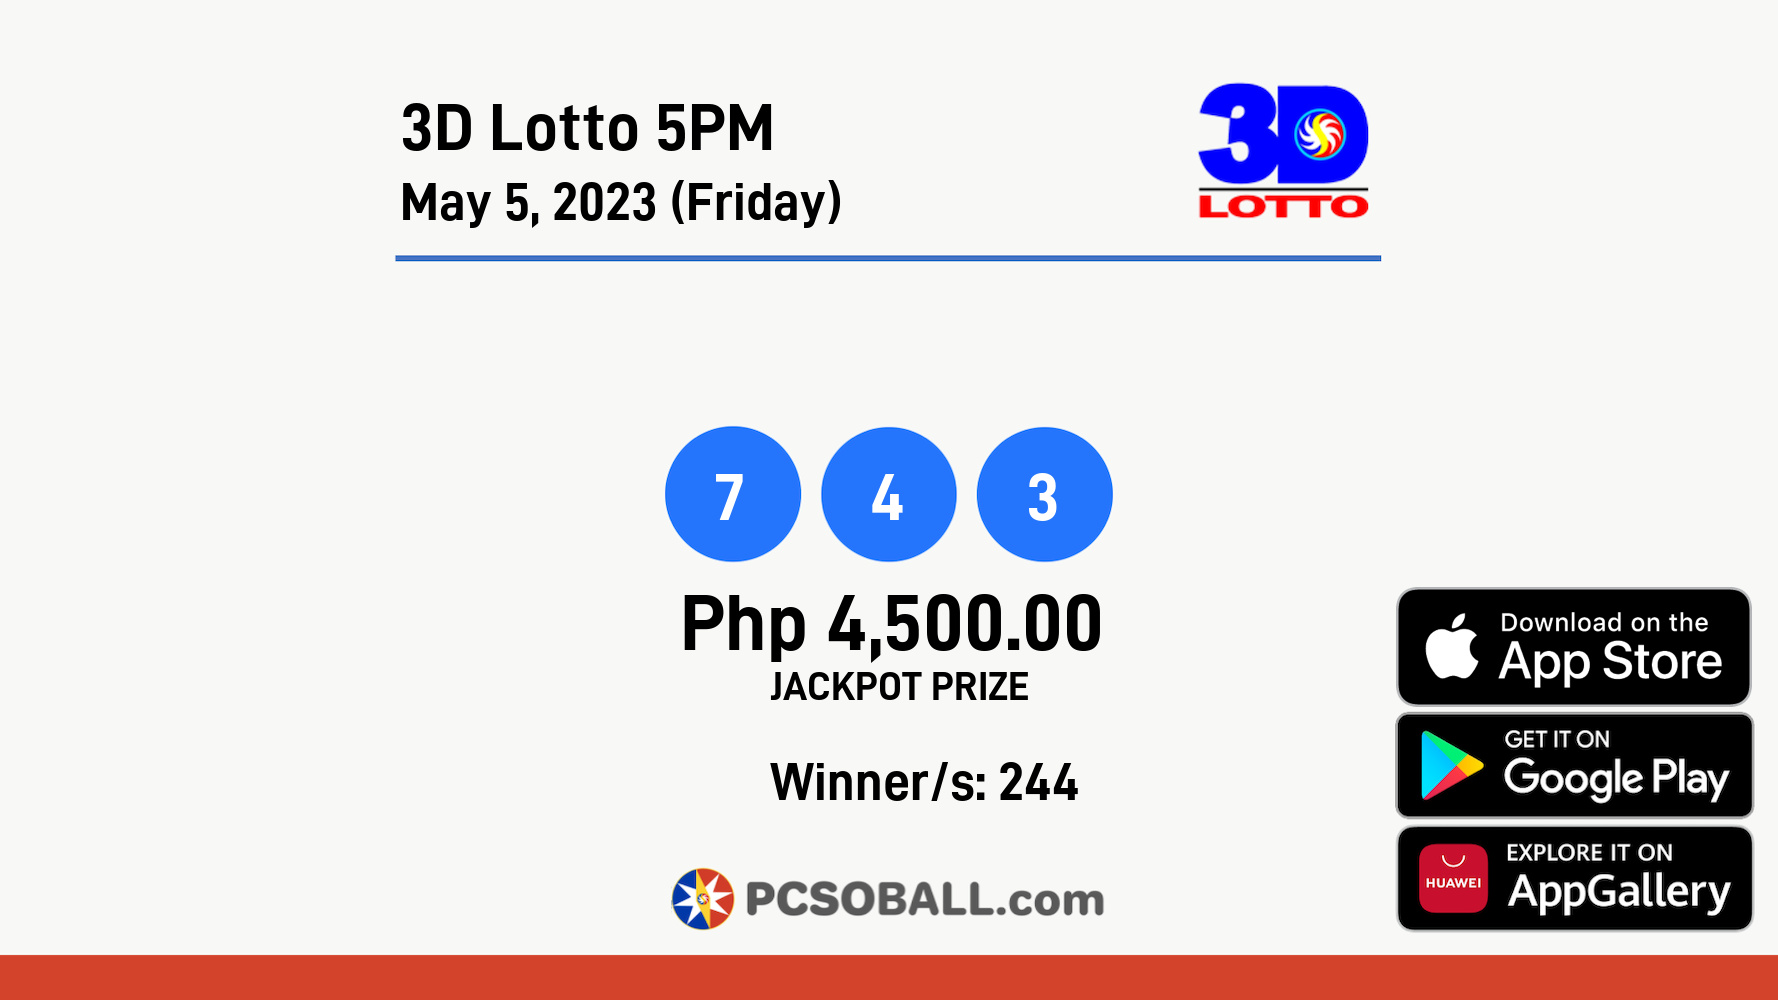 3D Lotto 5PM May 5, 2023 (Friday) Result